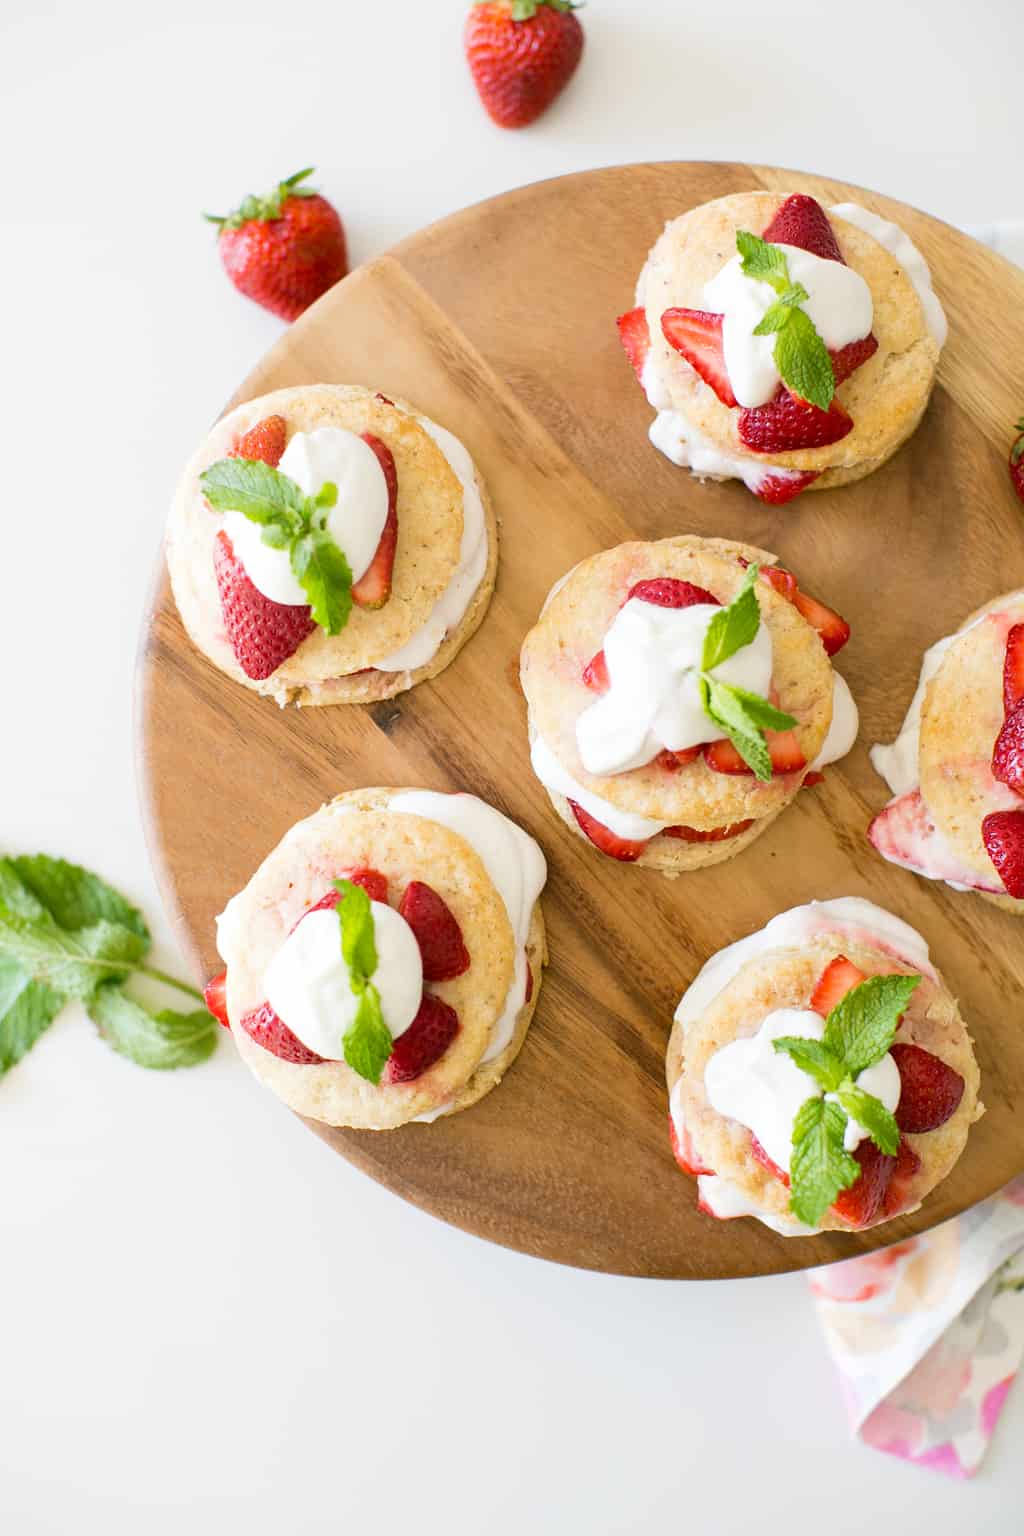 This Strawberry Maca Shortcake Will Be Your Go-To Summer Dessert